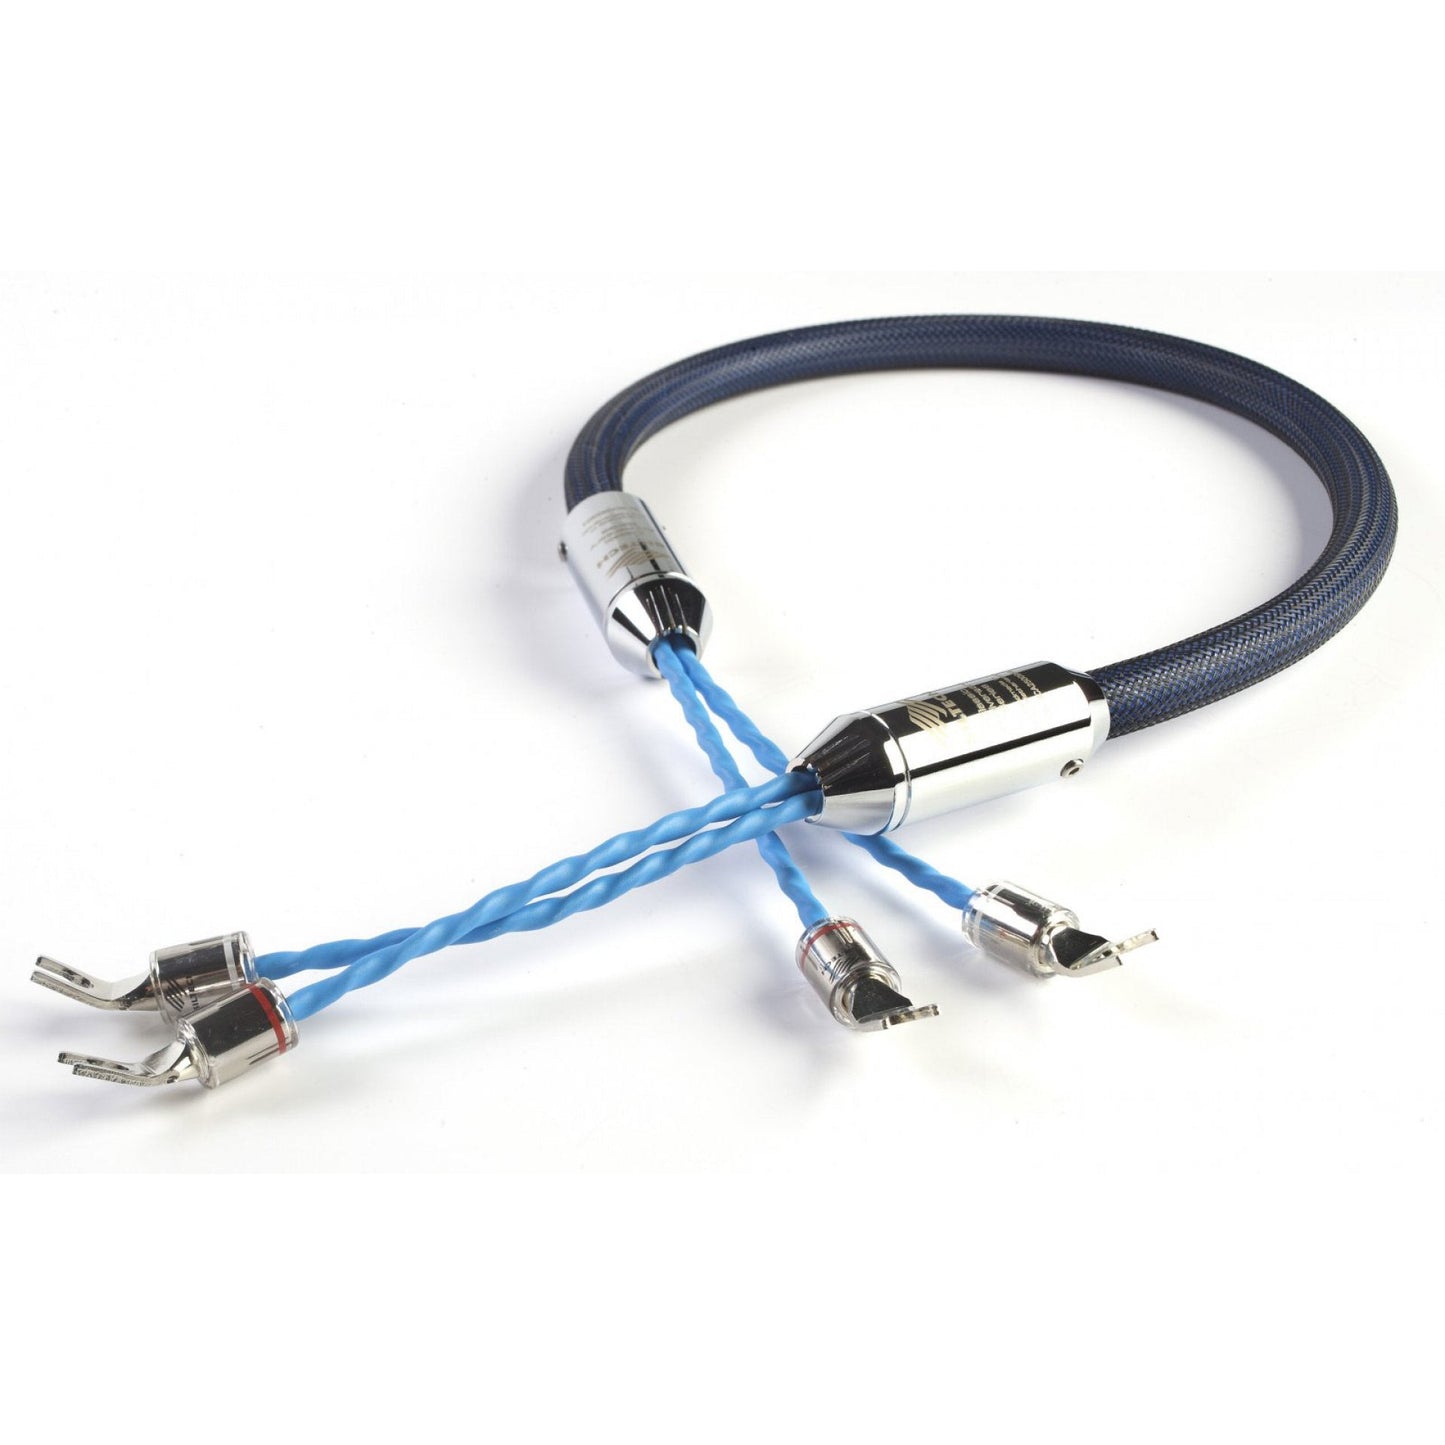 Siltech Classic Anniversary 330i Silver Speaker Cable